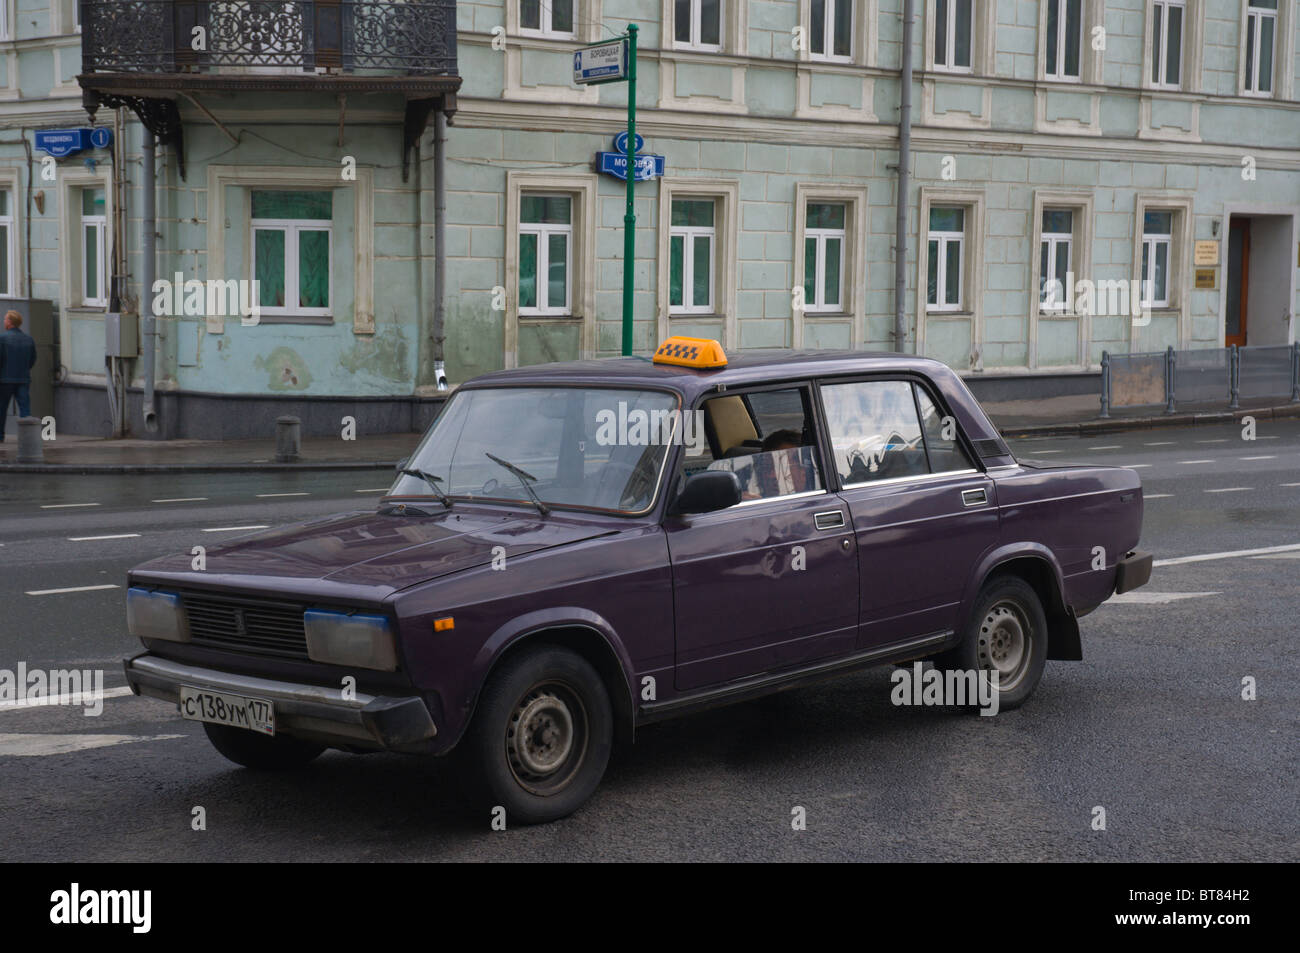 Lada taxi central Moscow Russia Europe Stock Photo